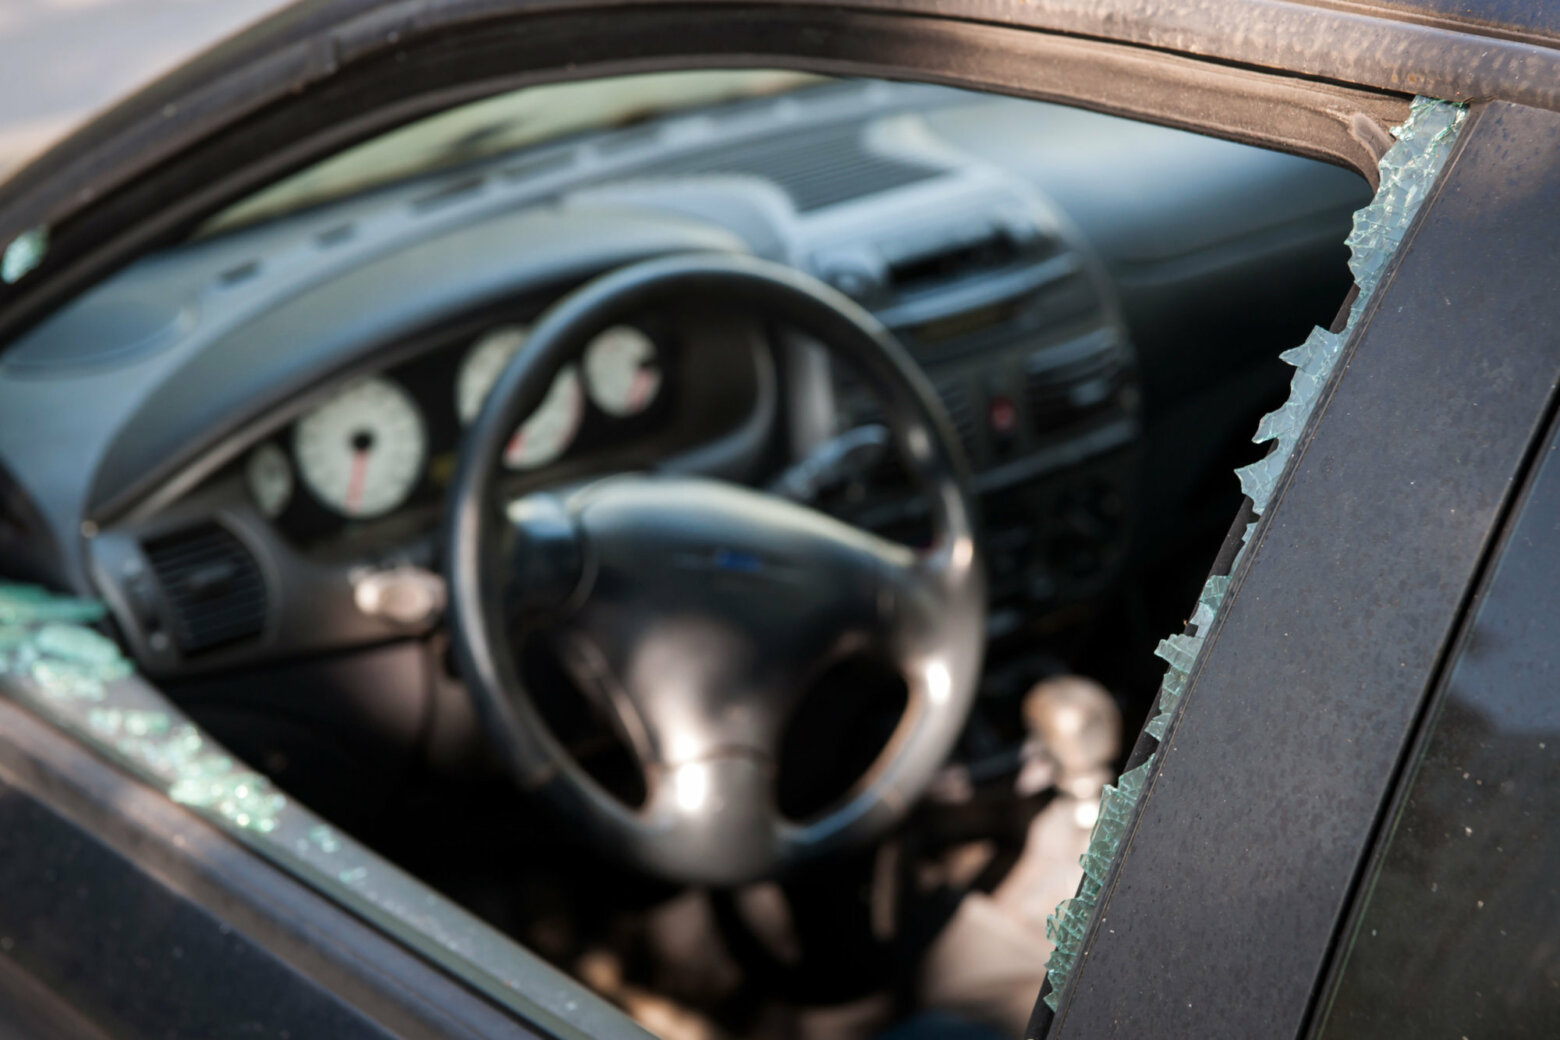 Stock image of a car with a broken window